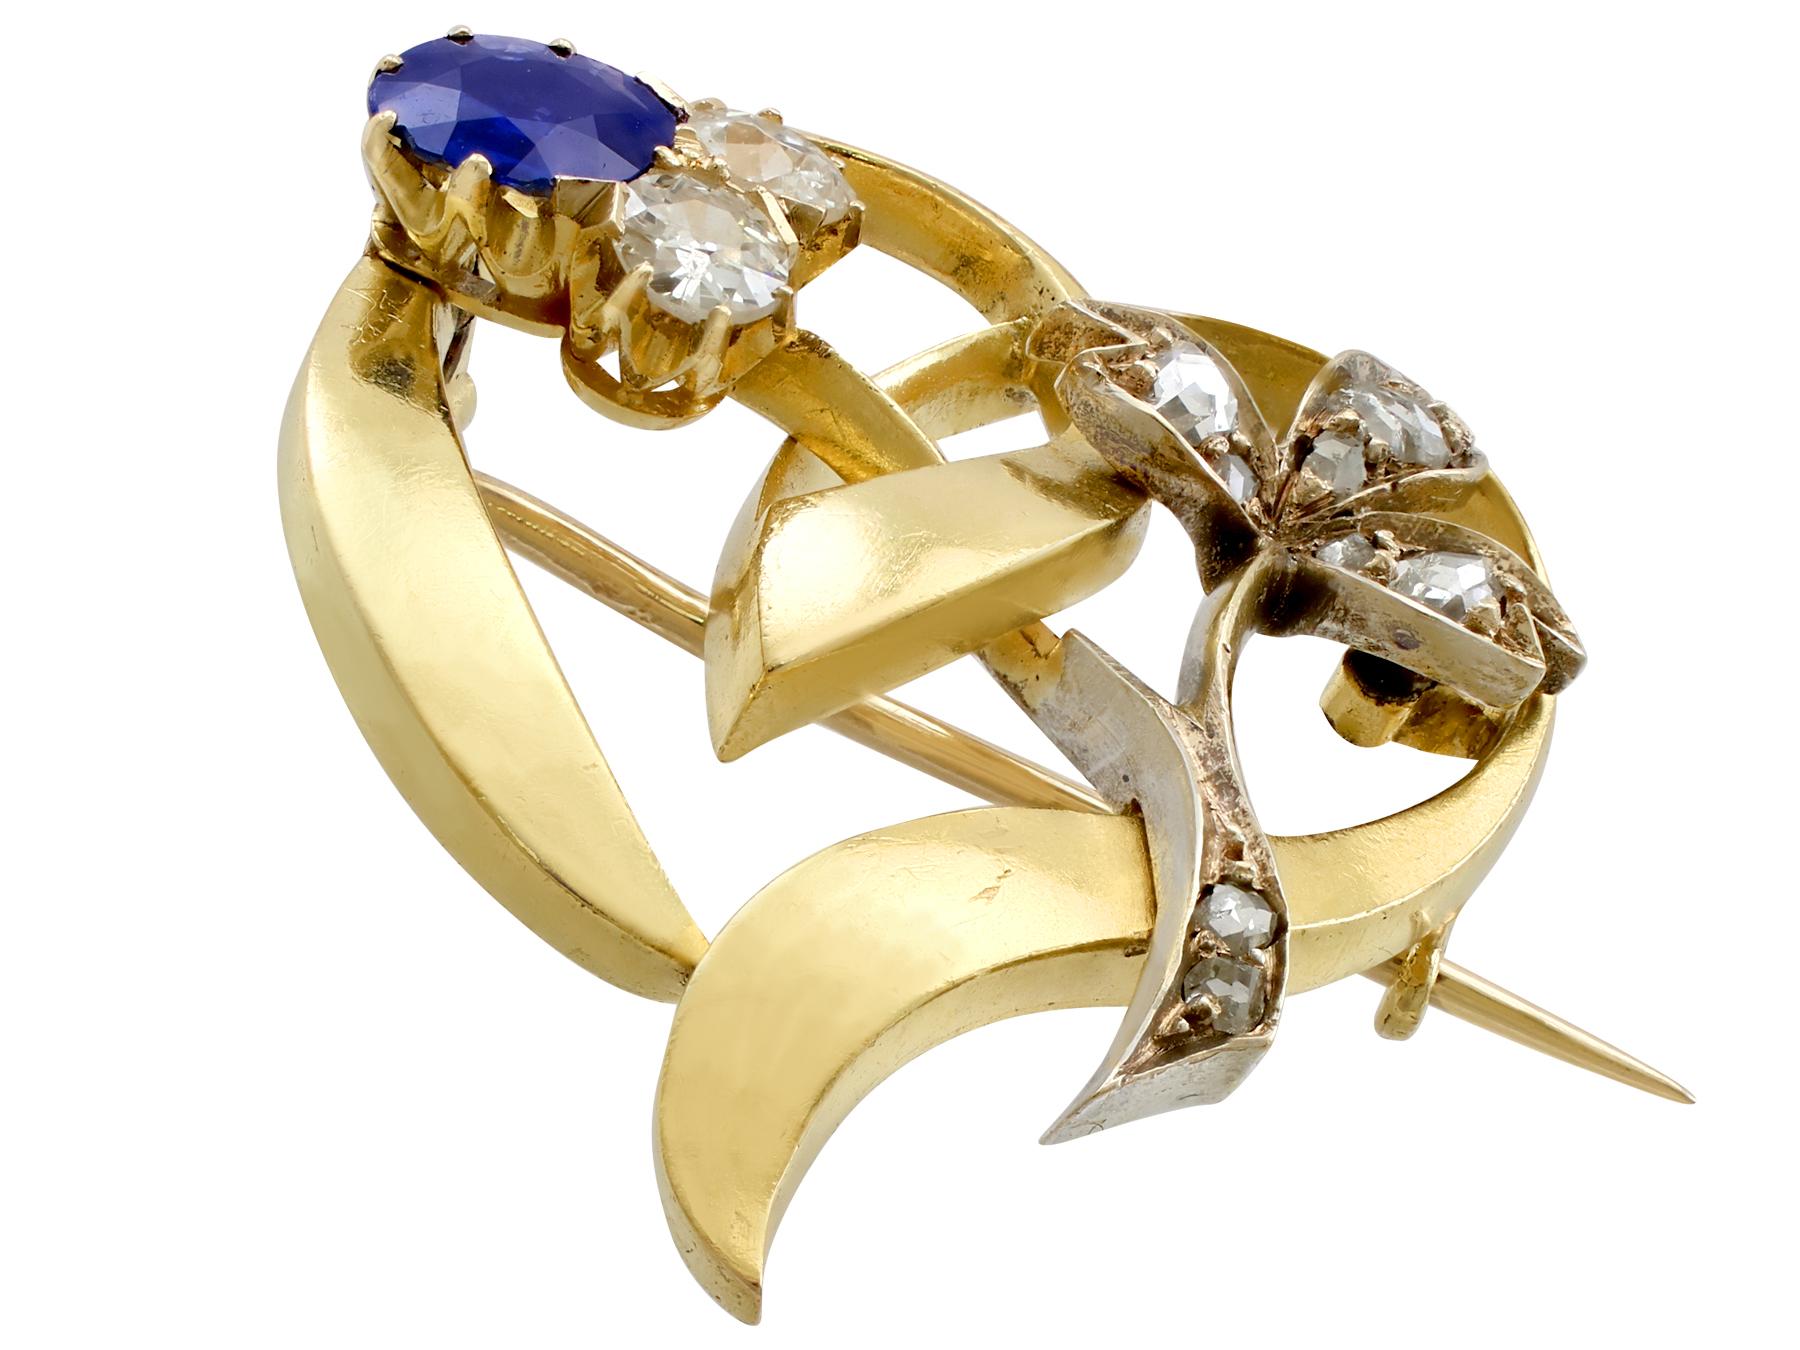 An impressive antique 0.45 carat sapphire and 0.60 carat diamond, 14 karat yellow gold heart shaped brooch; part of our diverse antique jewelry and estate jewelry collections.

This fine and impressive antique sapphire brooch has been crafted in 14k